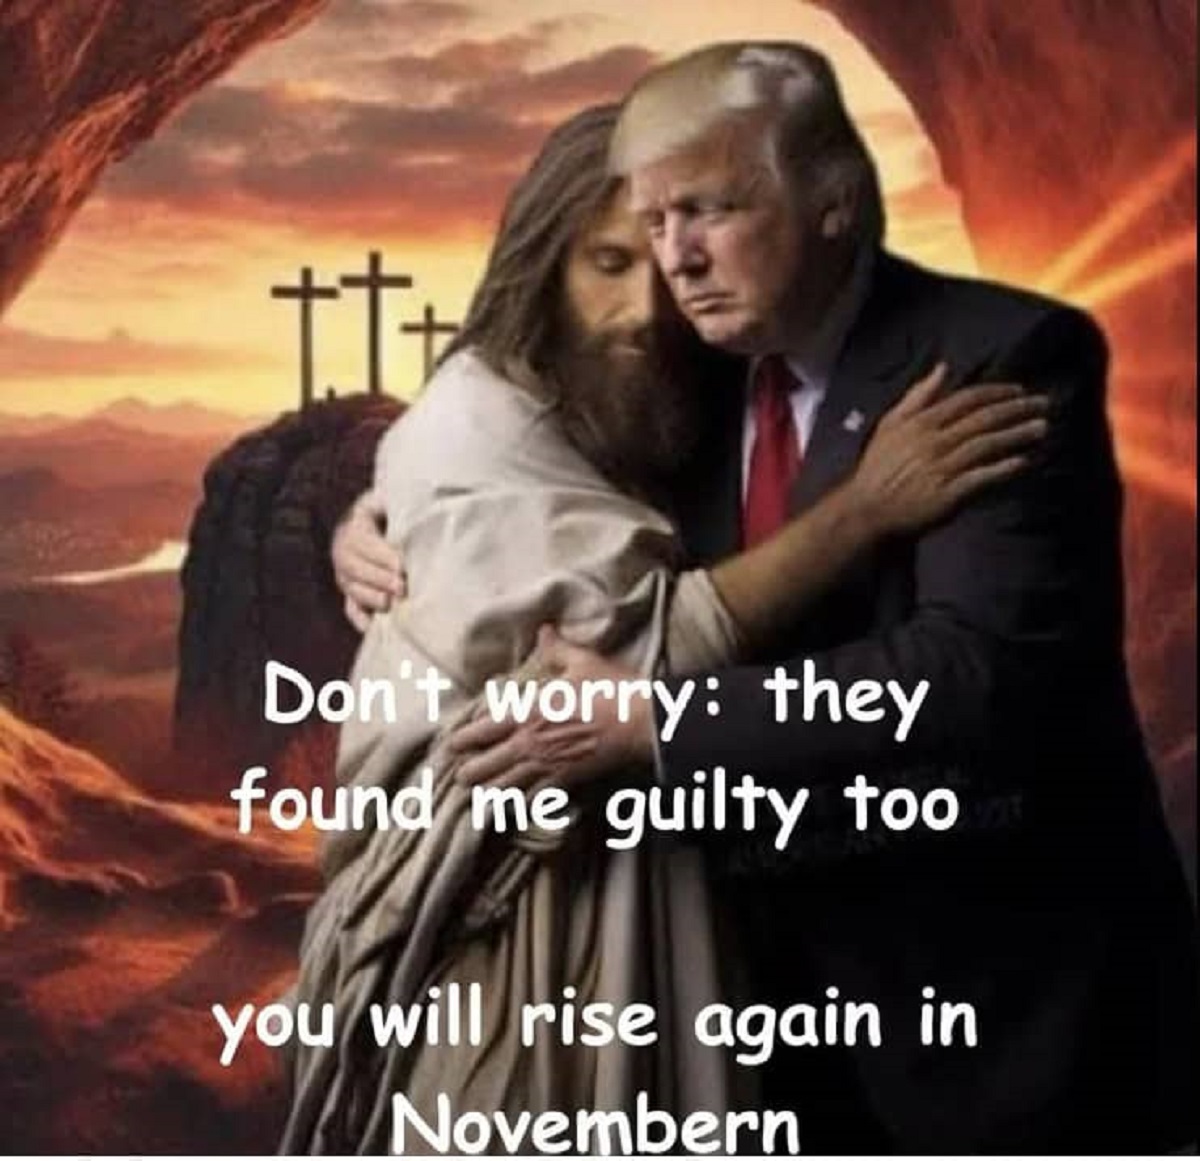 point jesus realized his wallet was missing - tt 201 Don't worry they found me guilty too you will rise again in Novembern